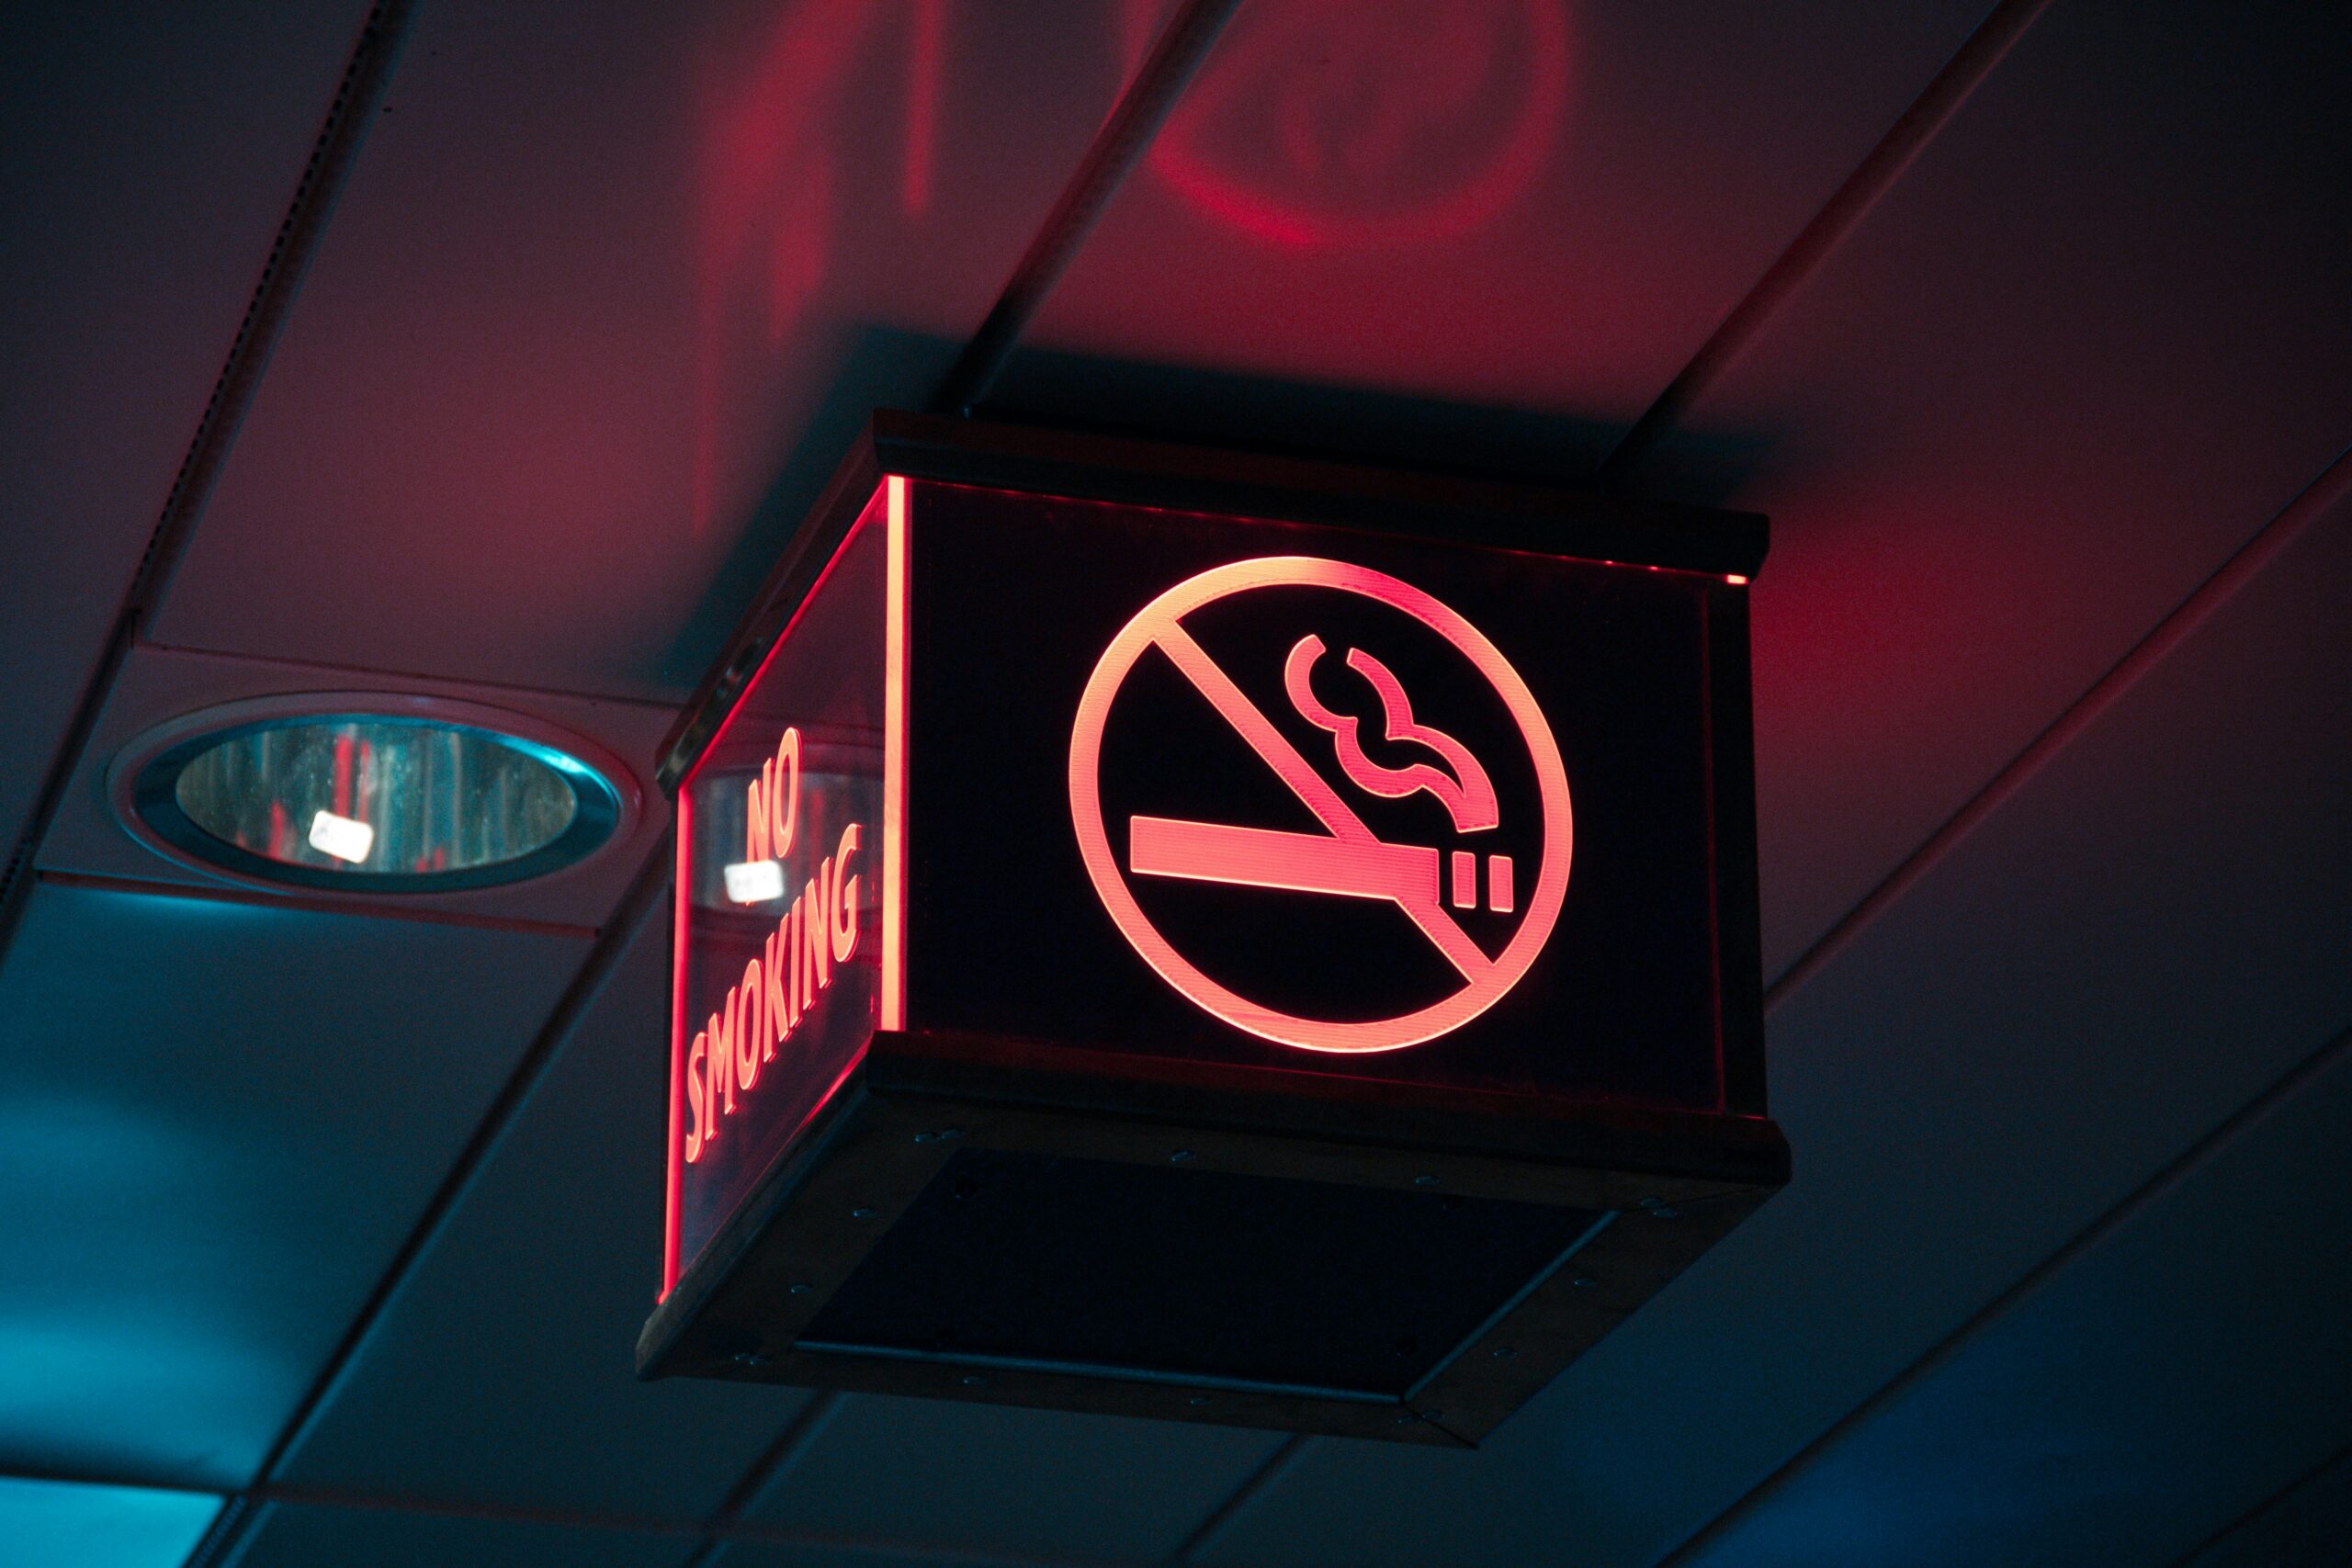 No smoking sign on a ceiling